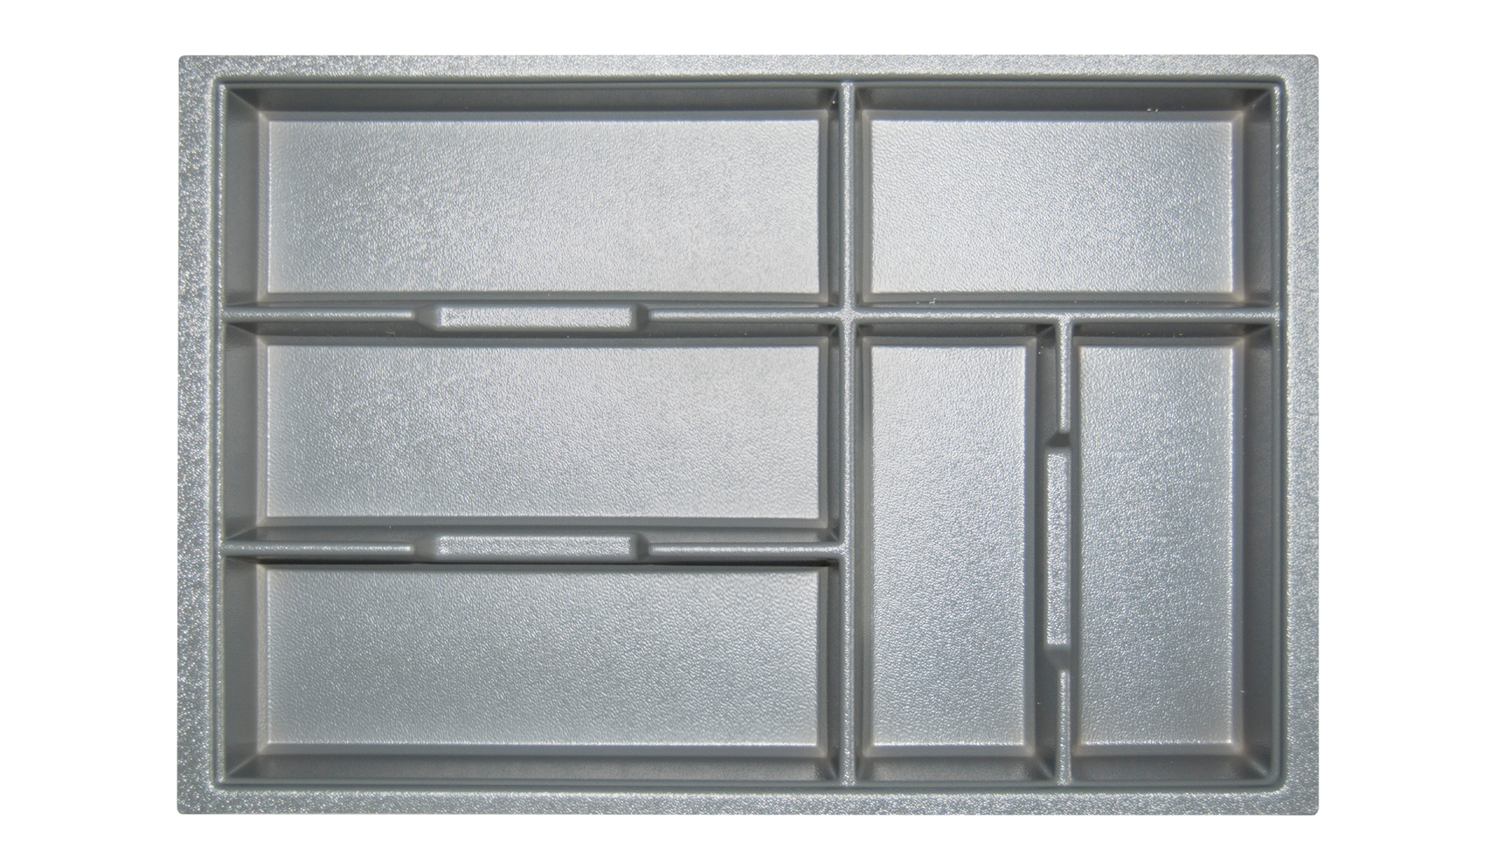 TANDEM BOX Cutlery Tray Insert to suit 500mm Depth